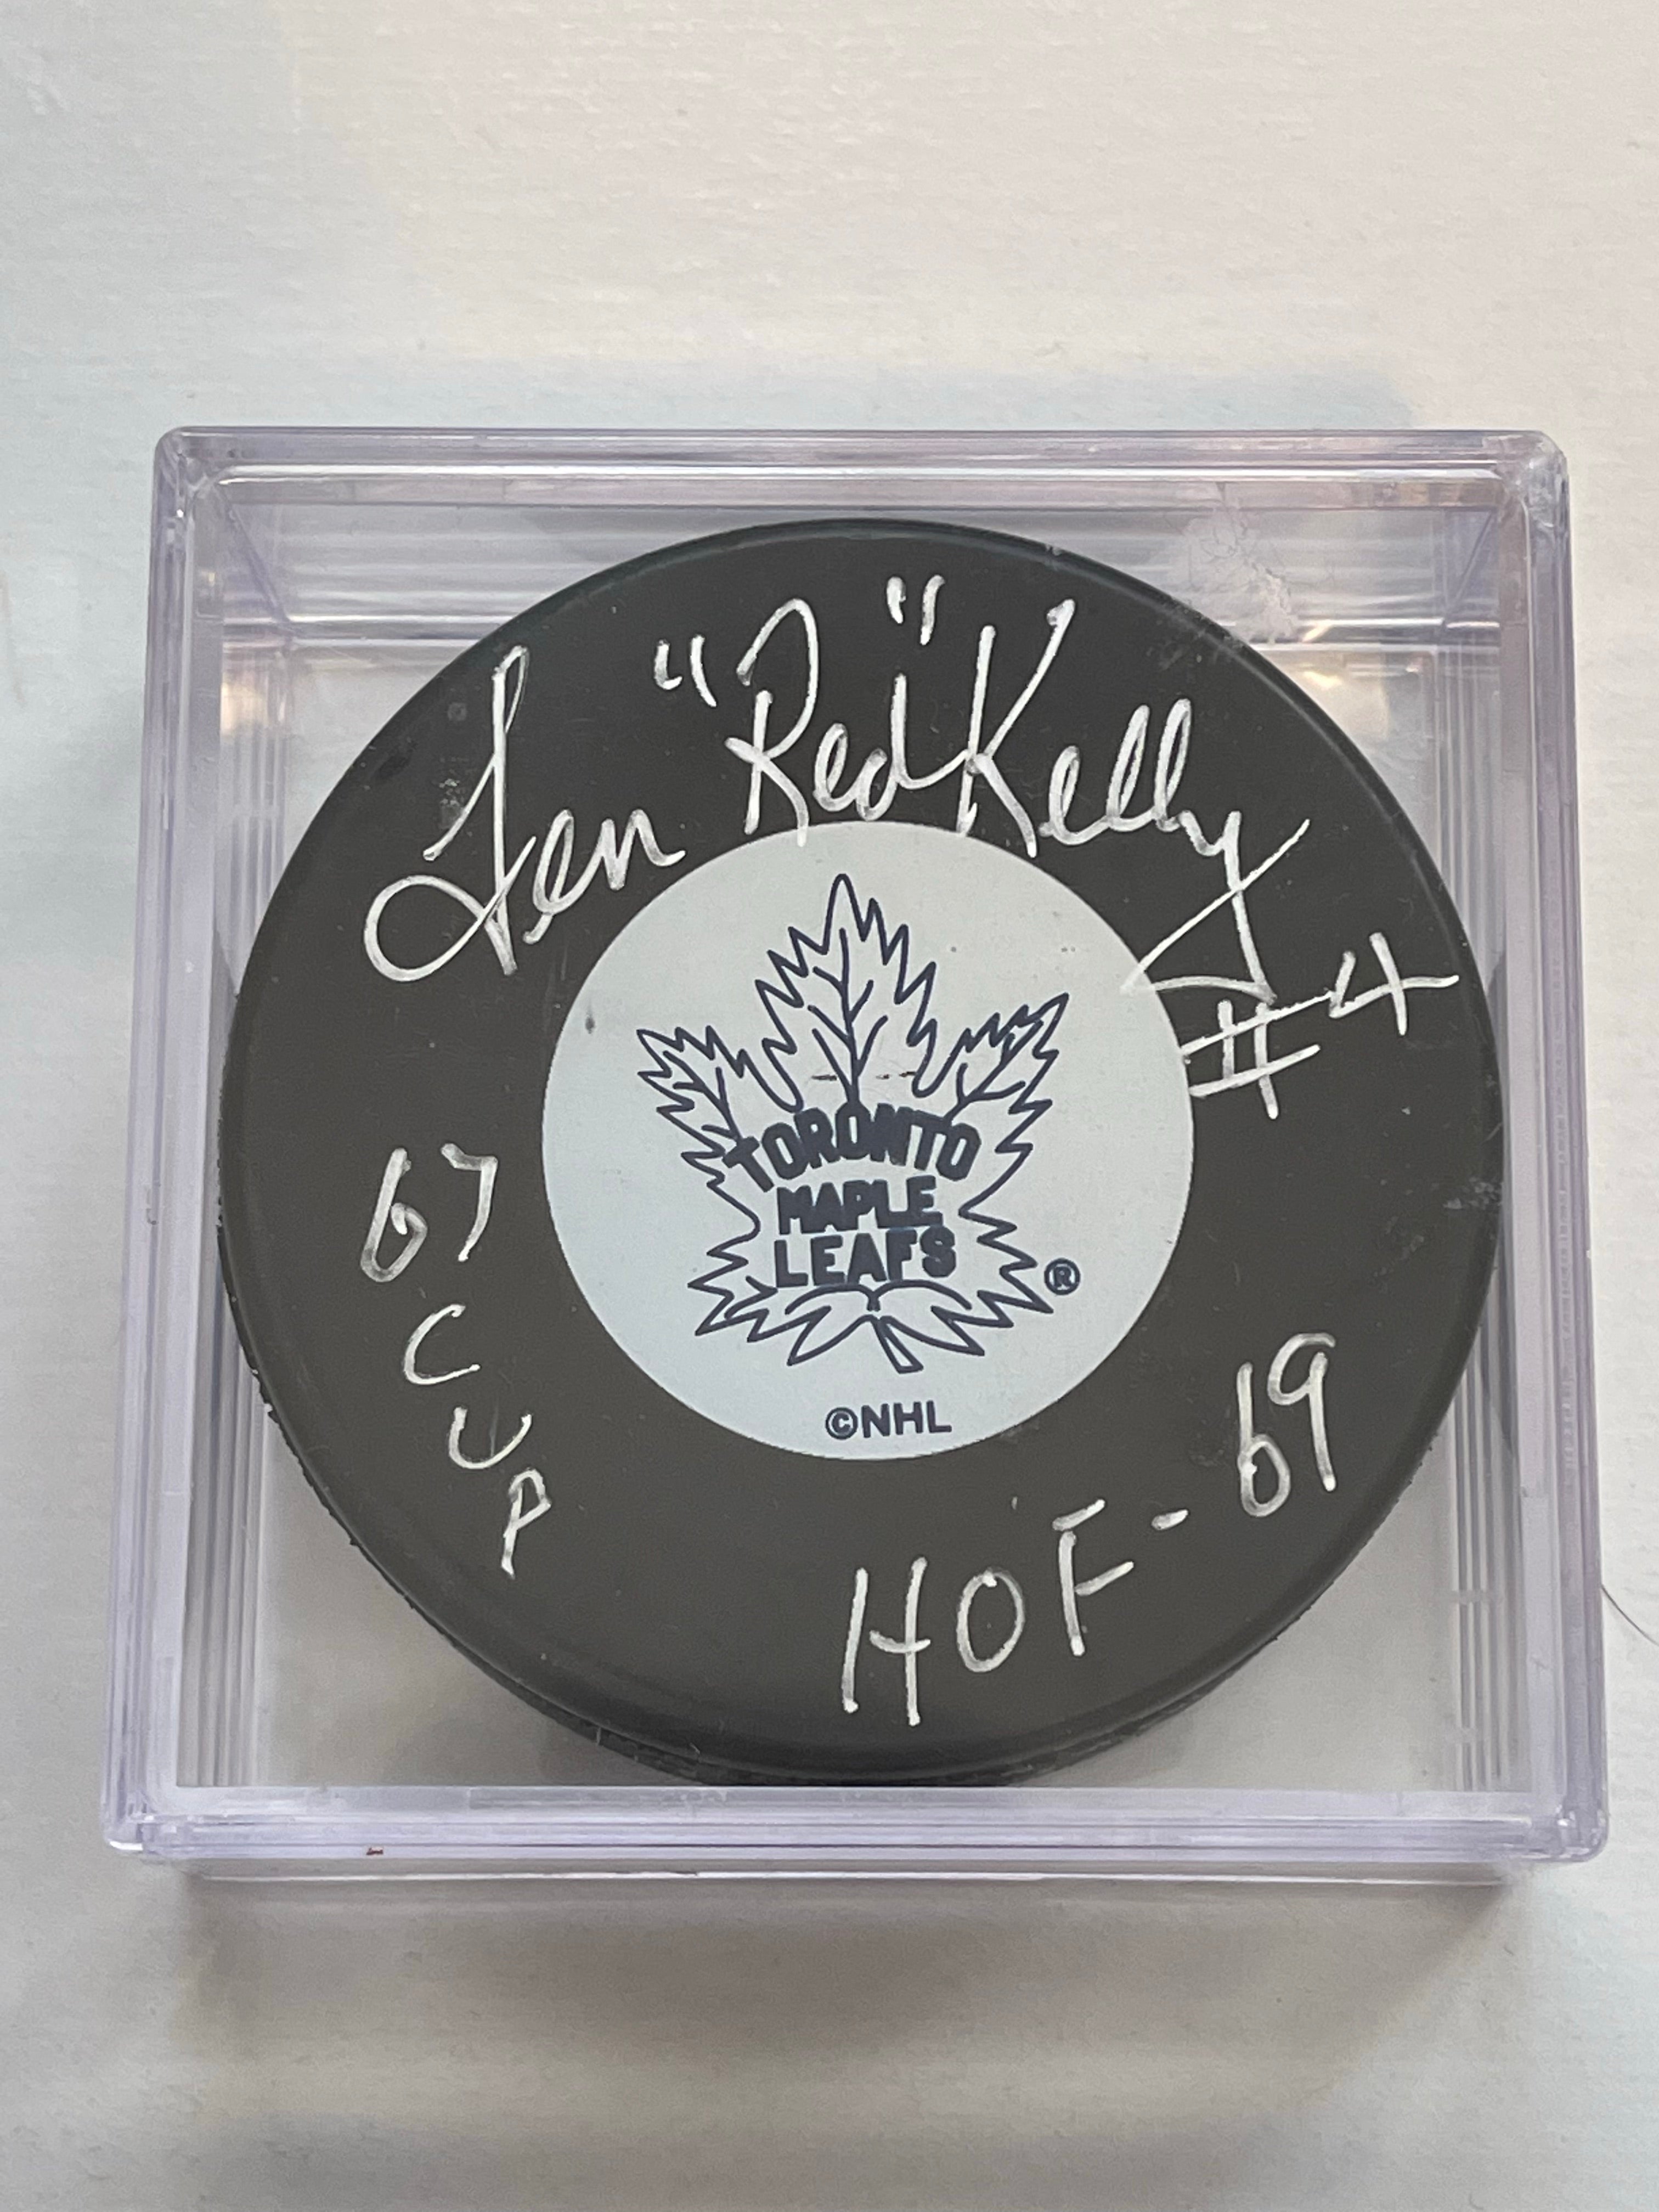 Red Kelly Toronto Maple Leafs hockey legend signed puck sold with COA